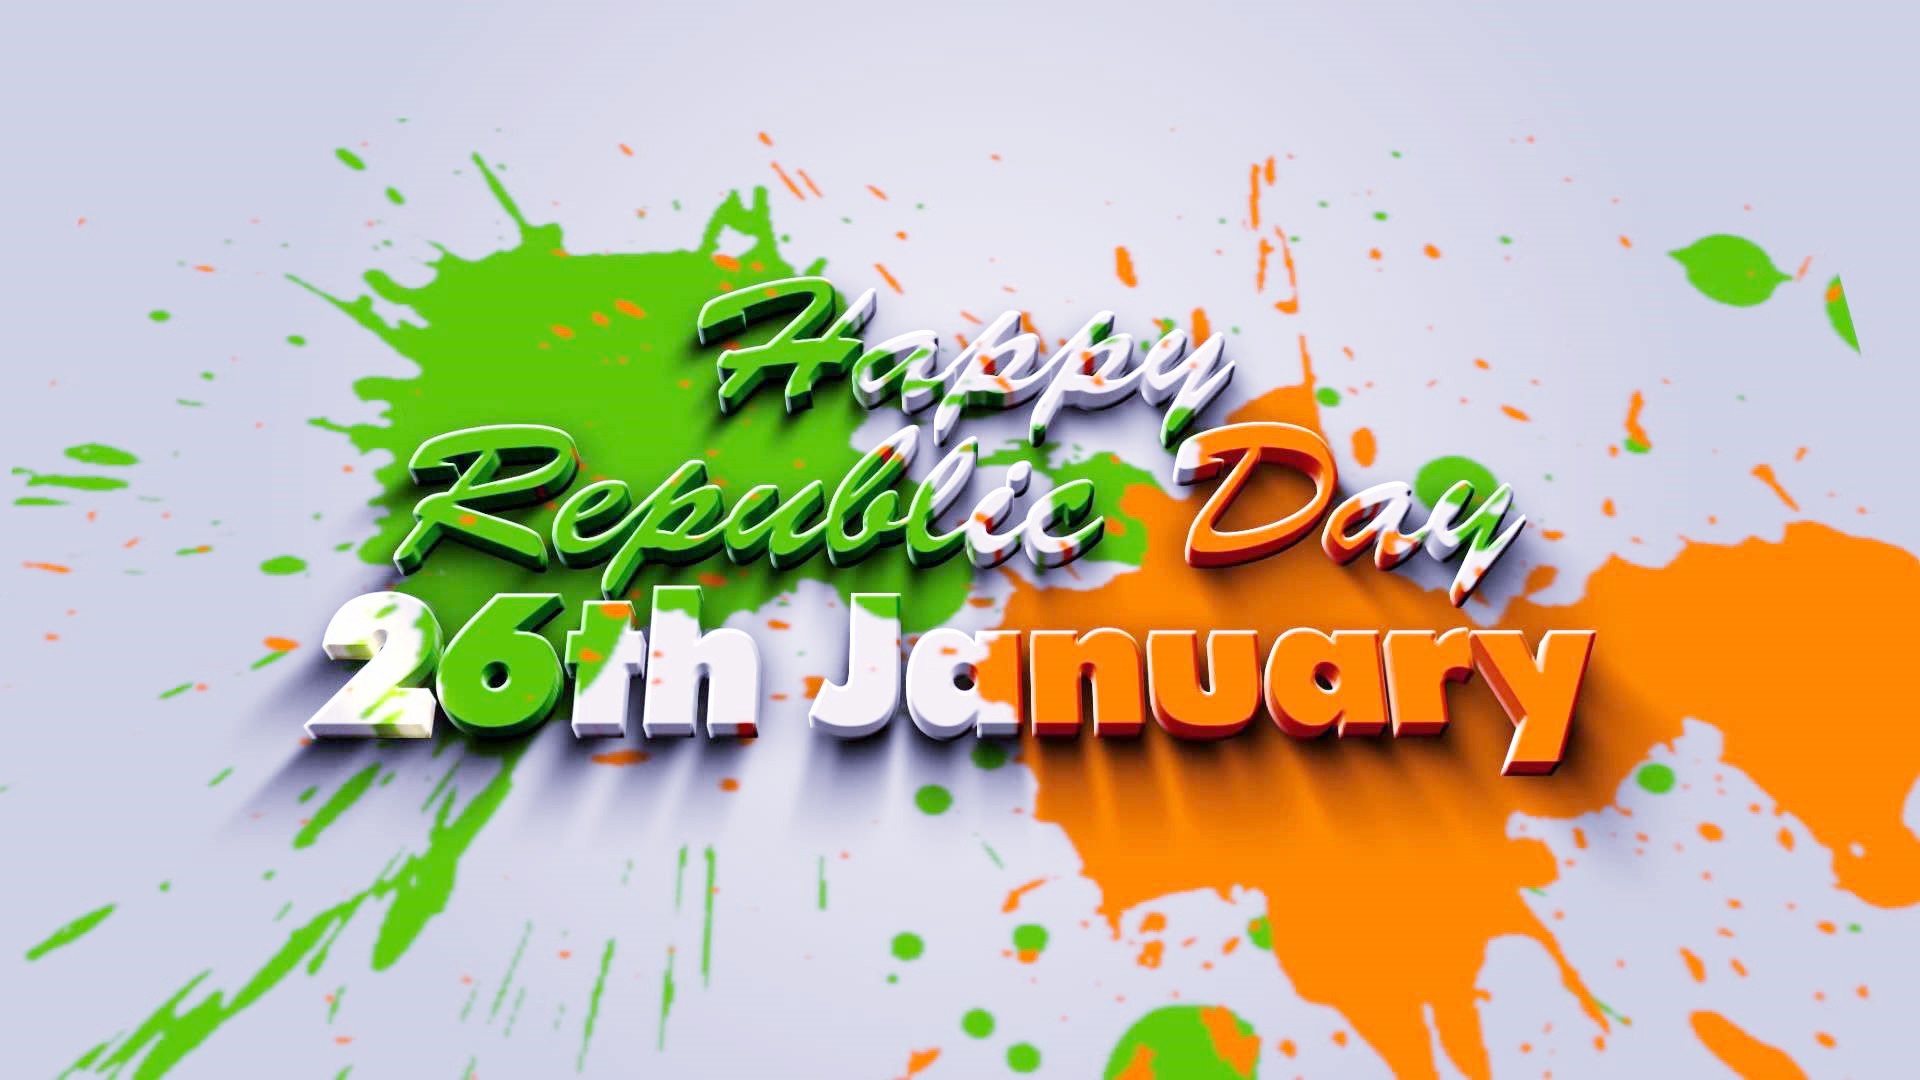 Happy Republic Day wishes images in hindi 